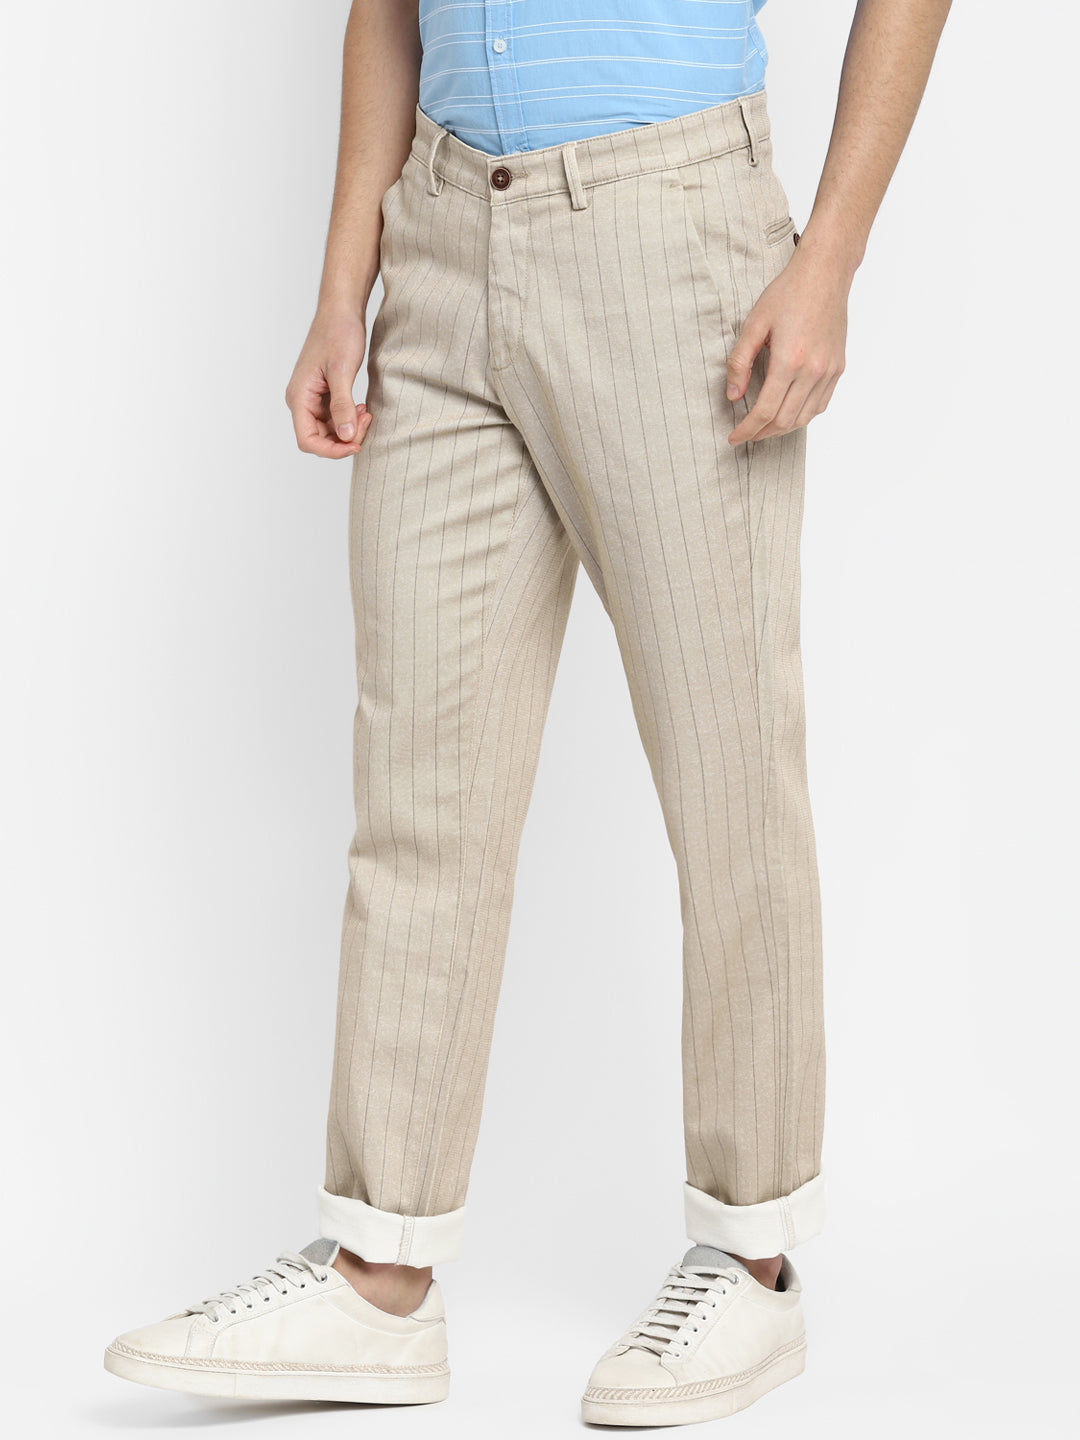 Cotton Stretch Beige Striped Narrow Fit Flat Front Casual Trouser